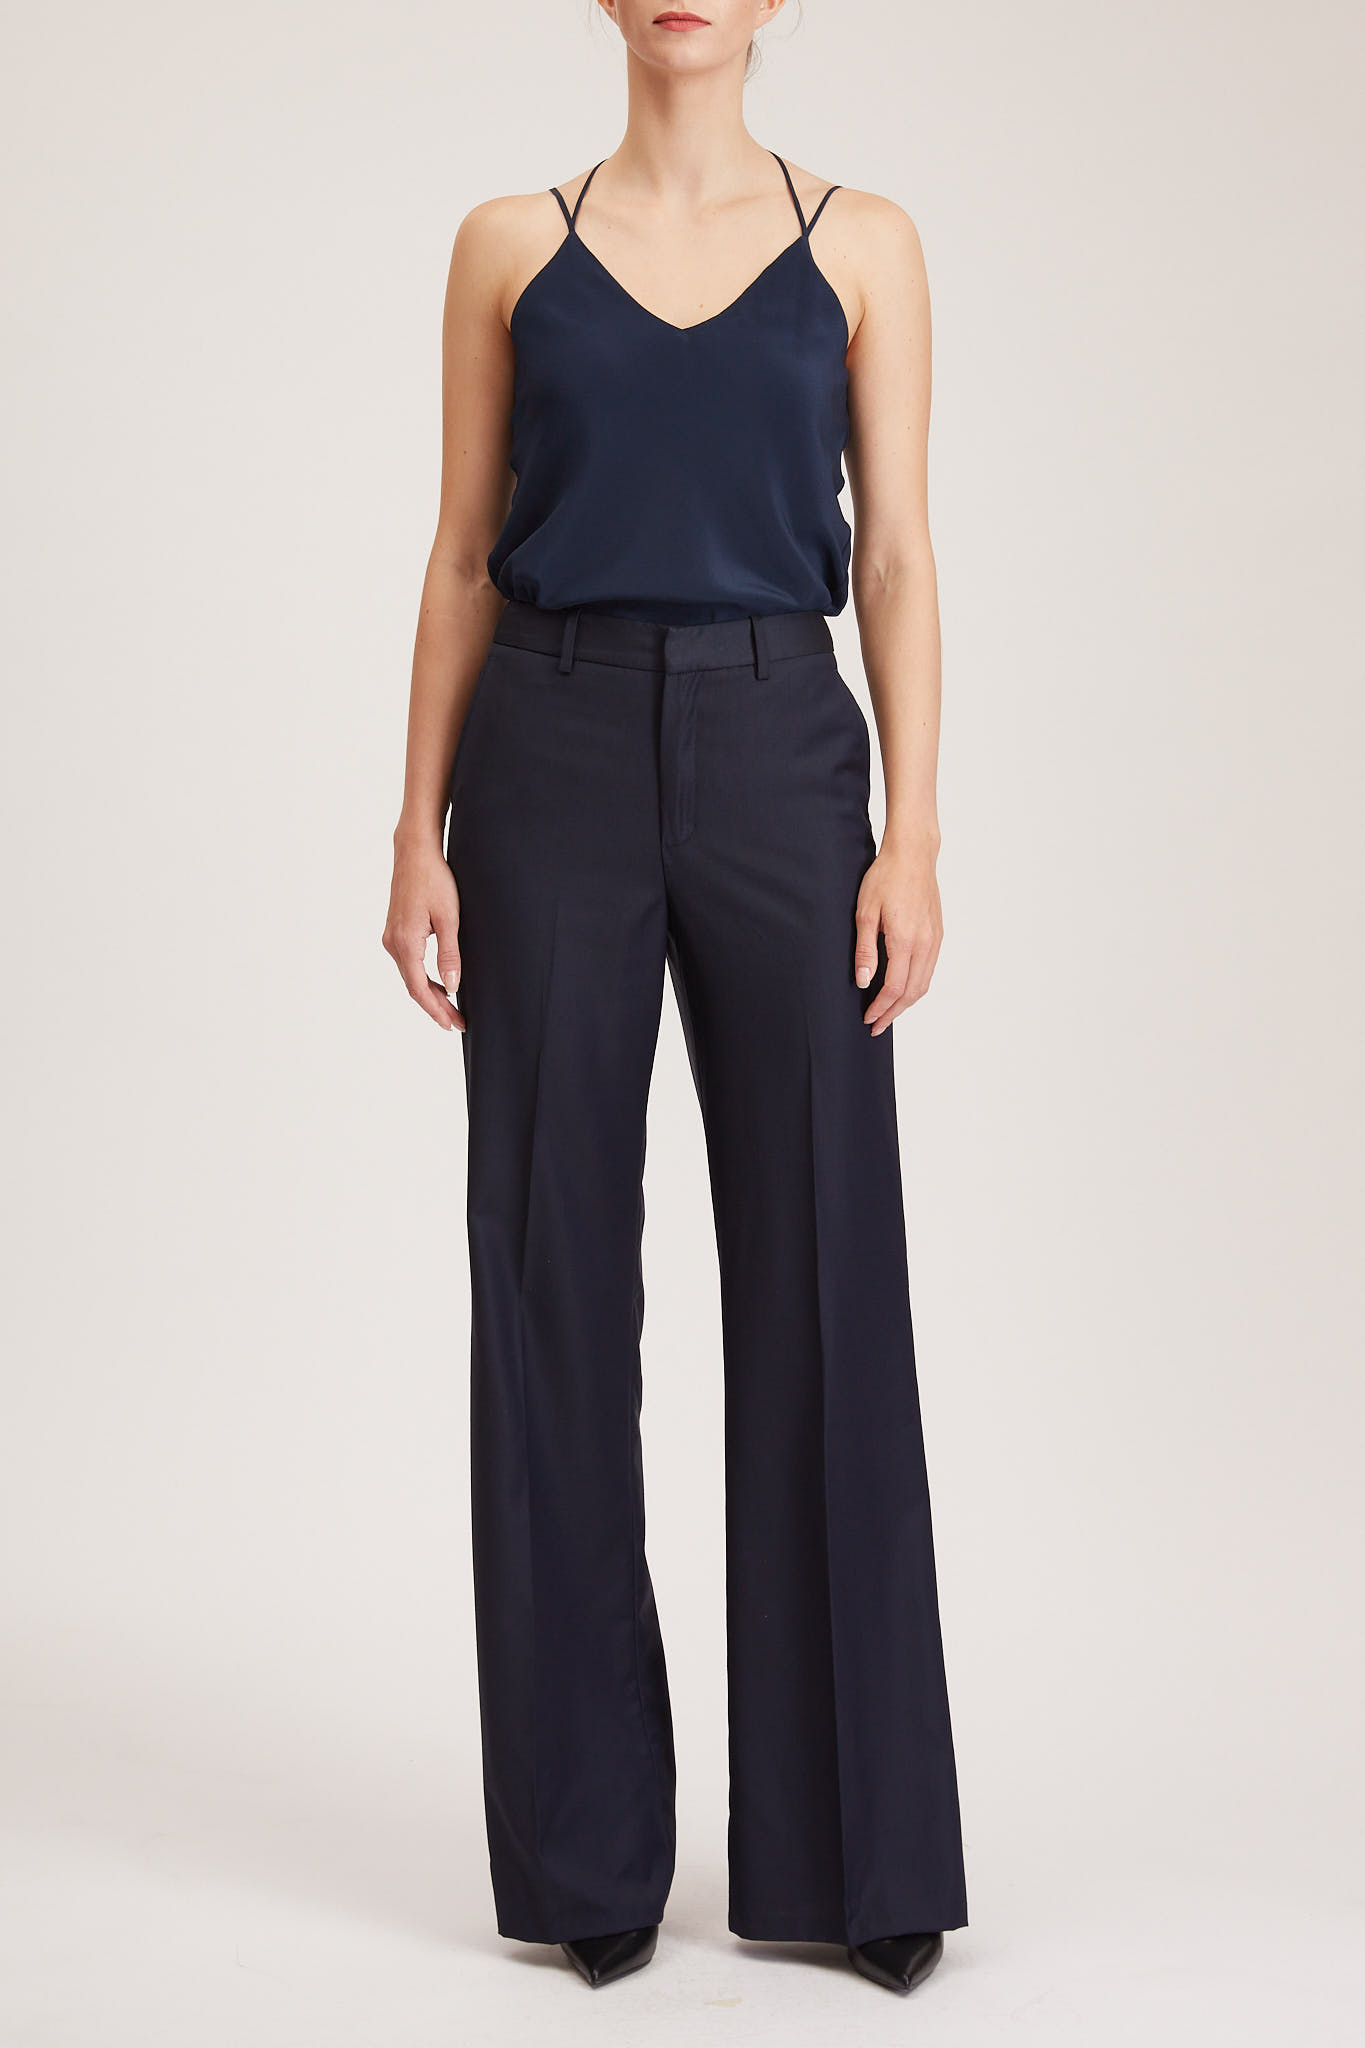 Bordeaux Trouser – Flared trousers in navy pure wool0